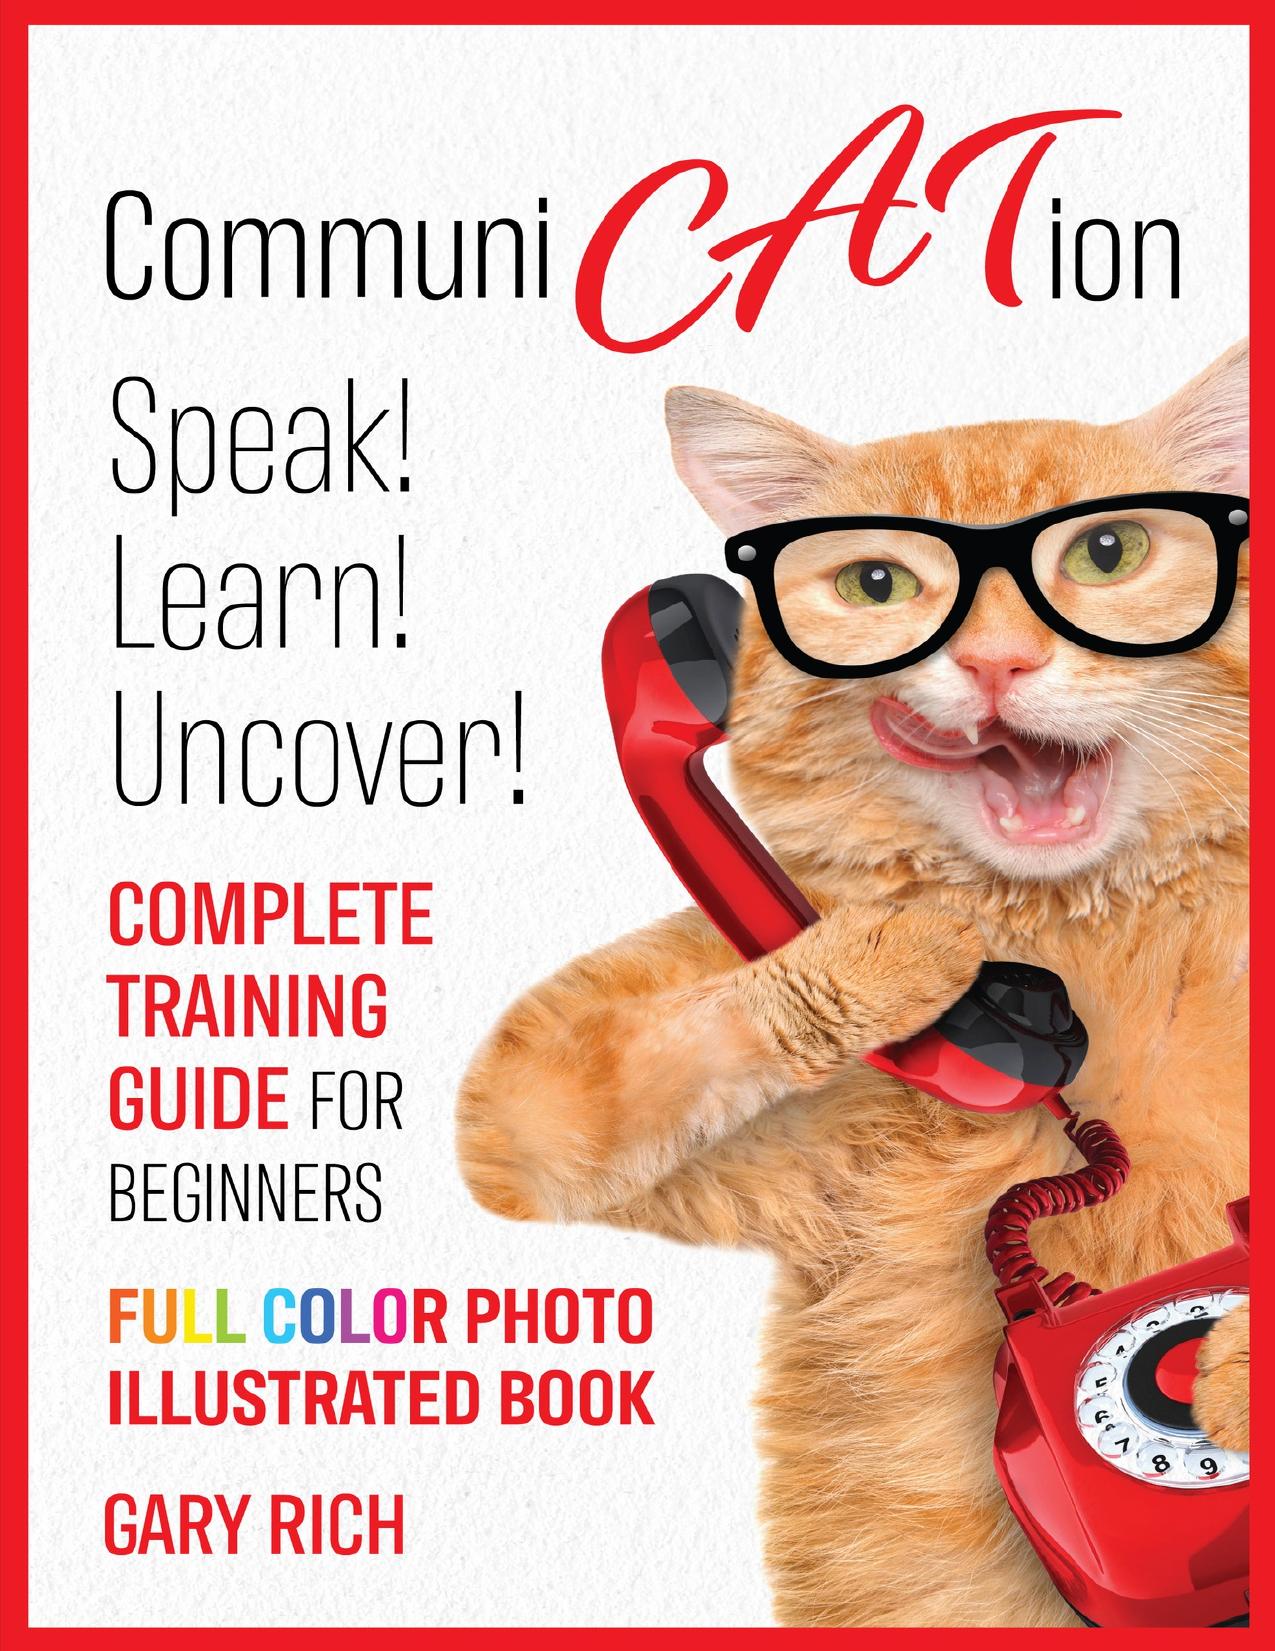 Communi Cat Ion : Speak - Learn- Uncover-Complete Training Guide for beginners-Full Color Photo Illustrated Book by Rich Gary